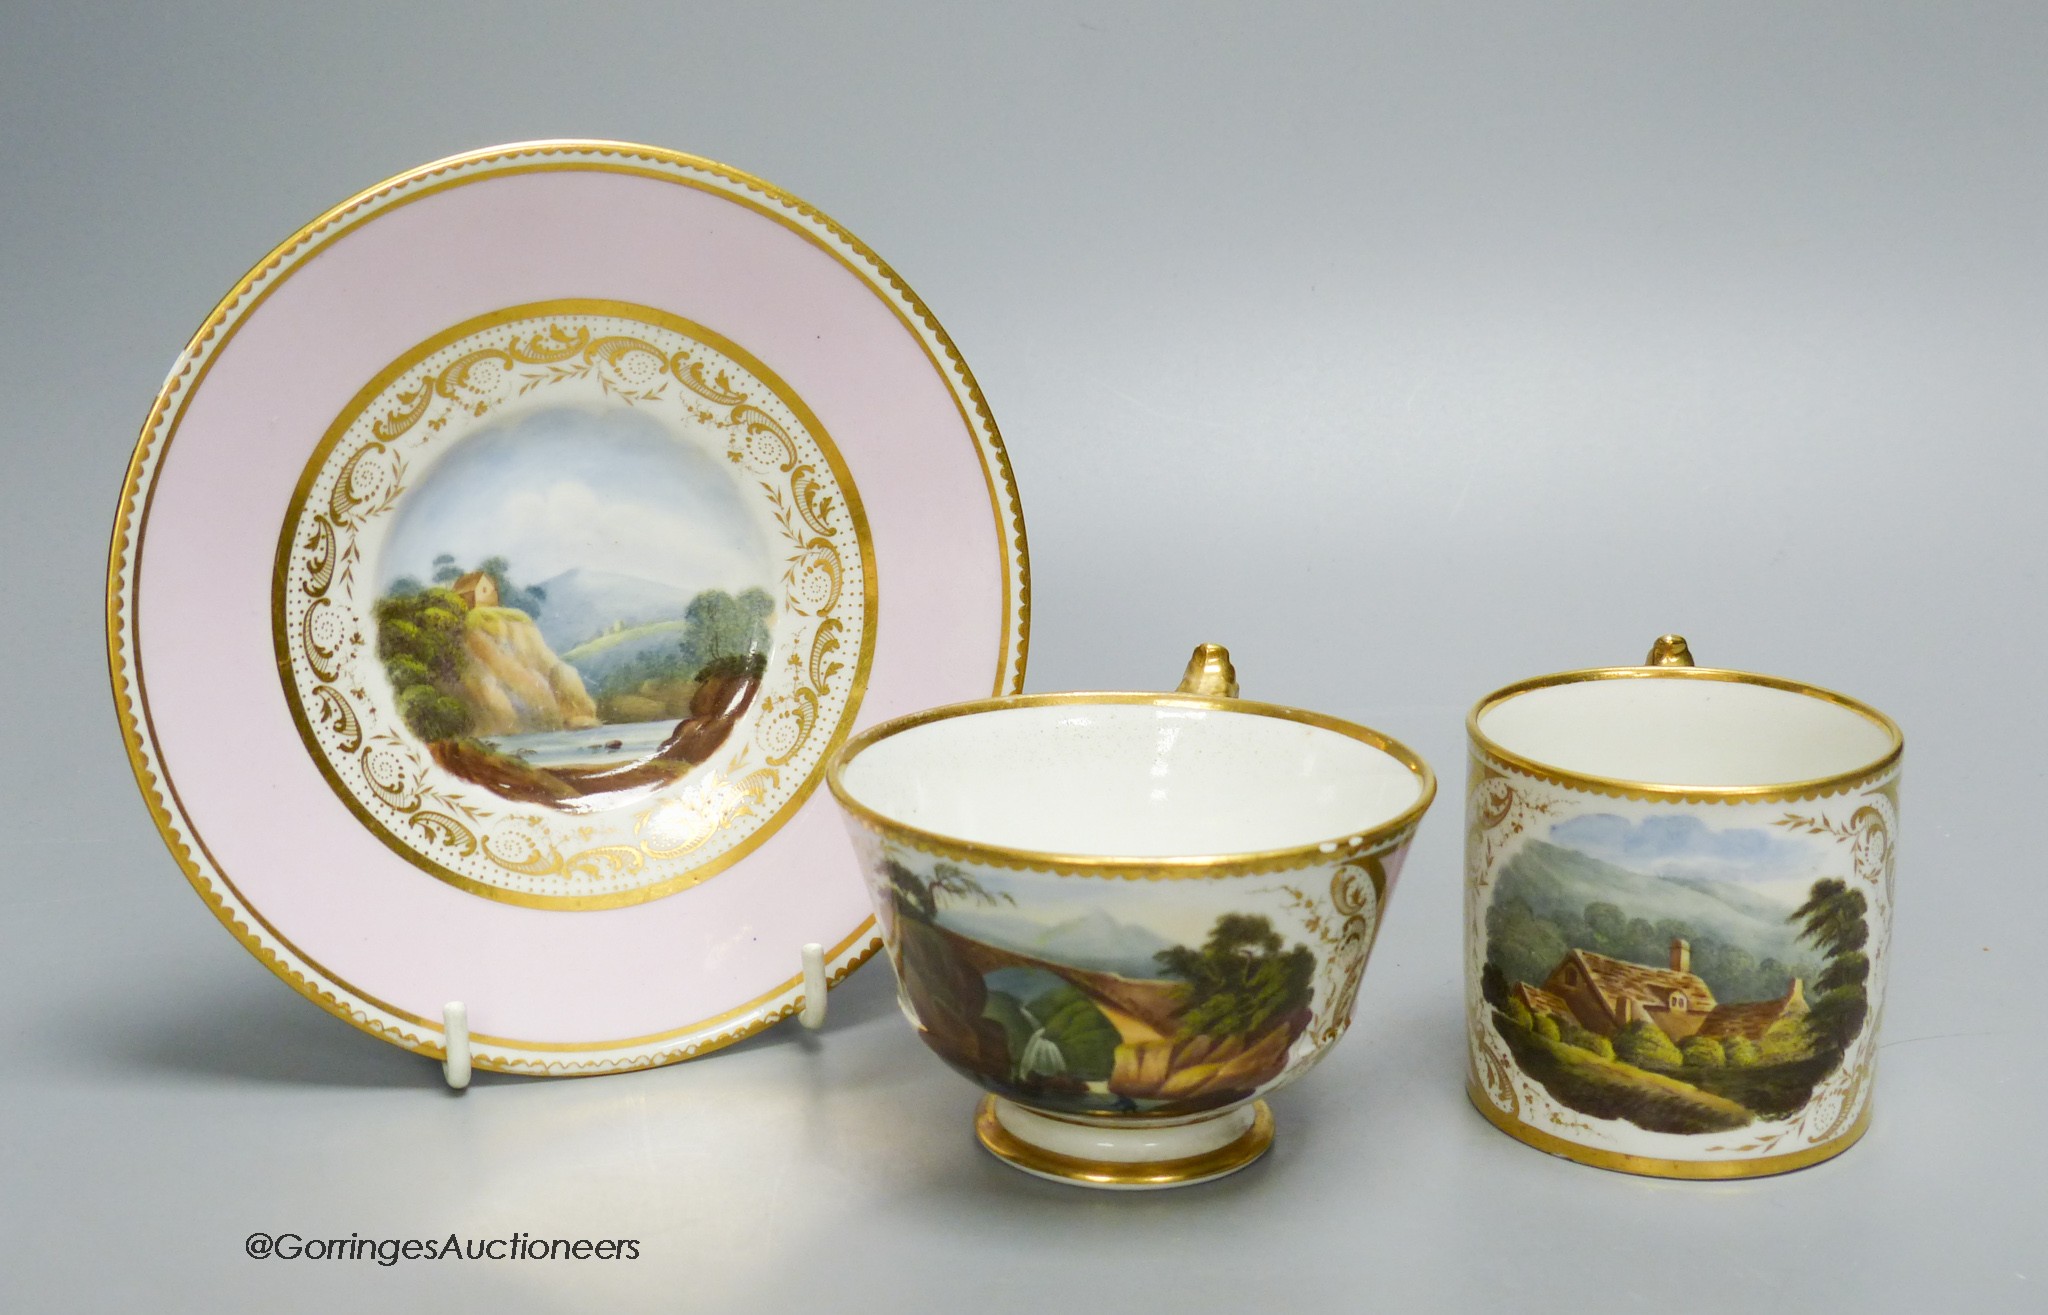 A finest quality Barr Flight and Barr coffee can, teacup and saucer painted with named scenes